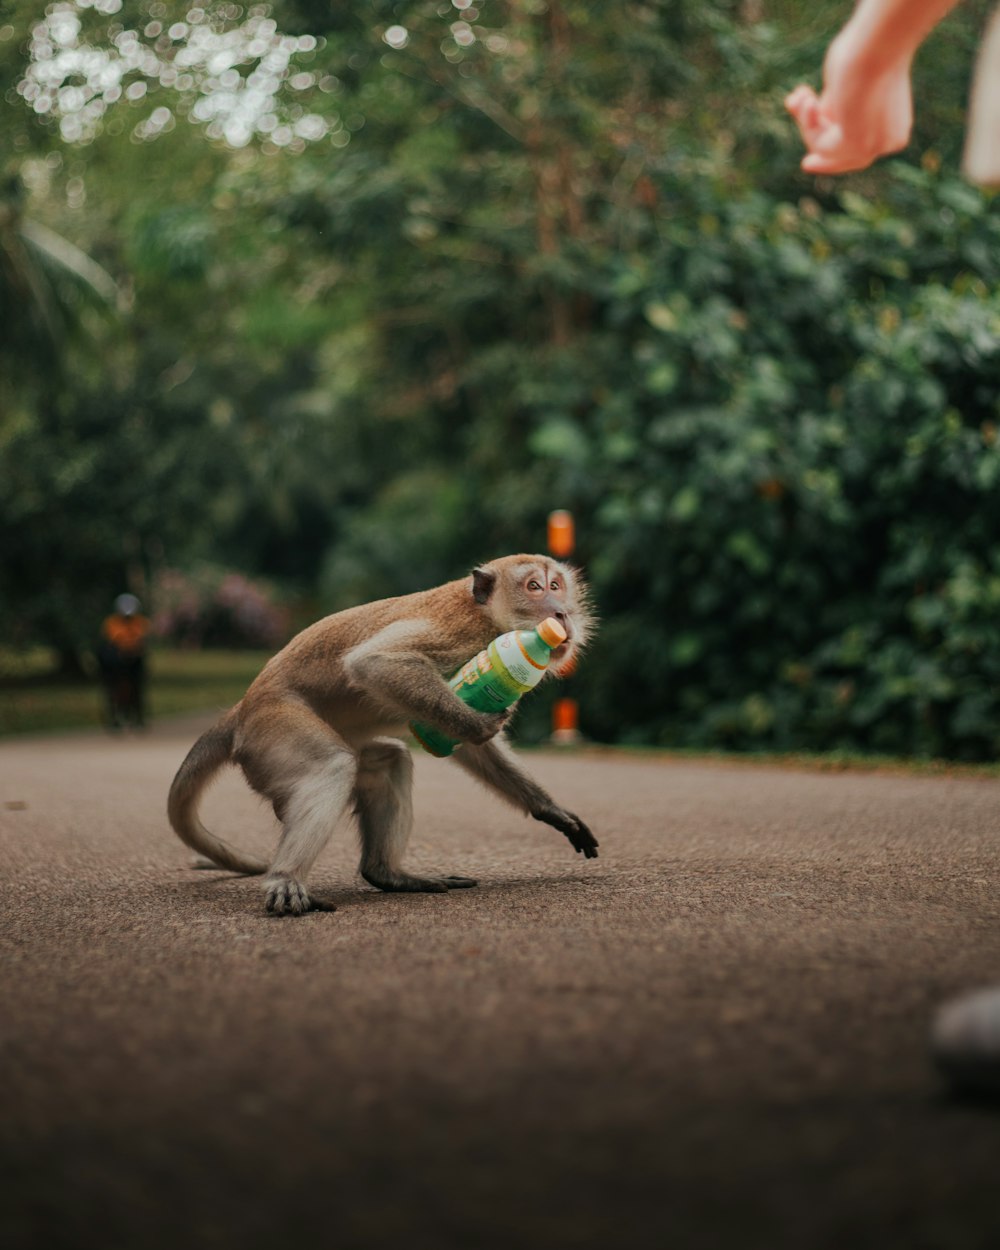 a monkey is playing with a ball in the street